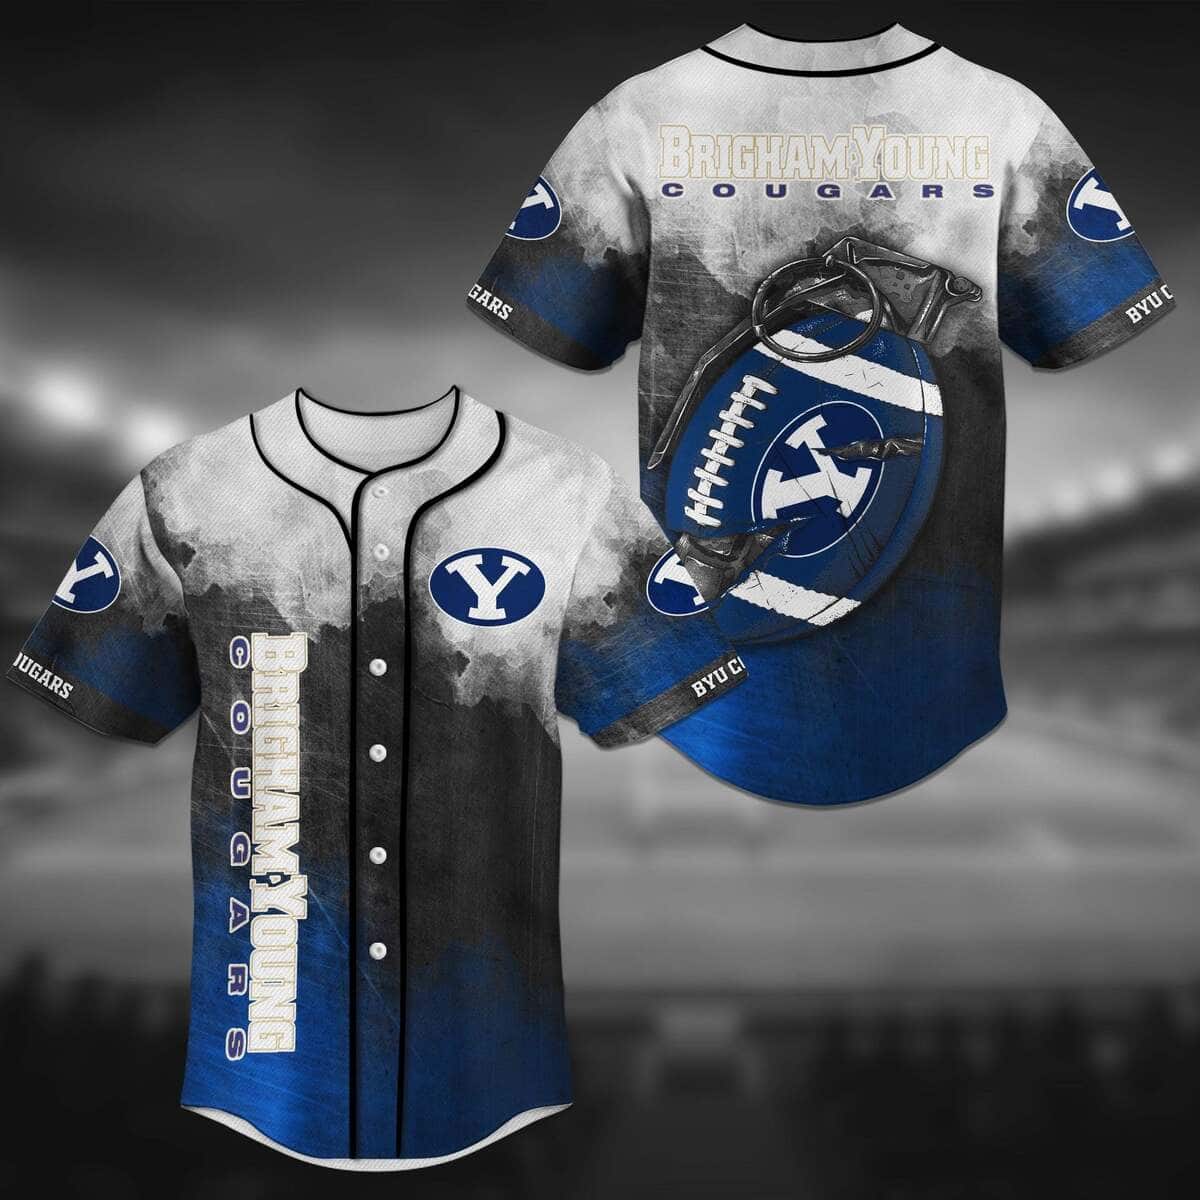 Awesome NFL BYU Cougars Baseball Jersey Grenade Gift For Football Lovers